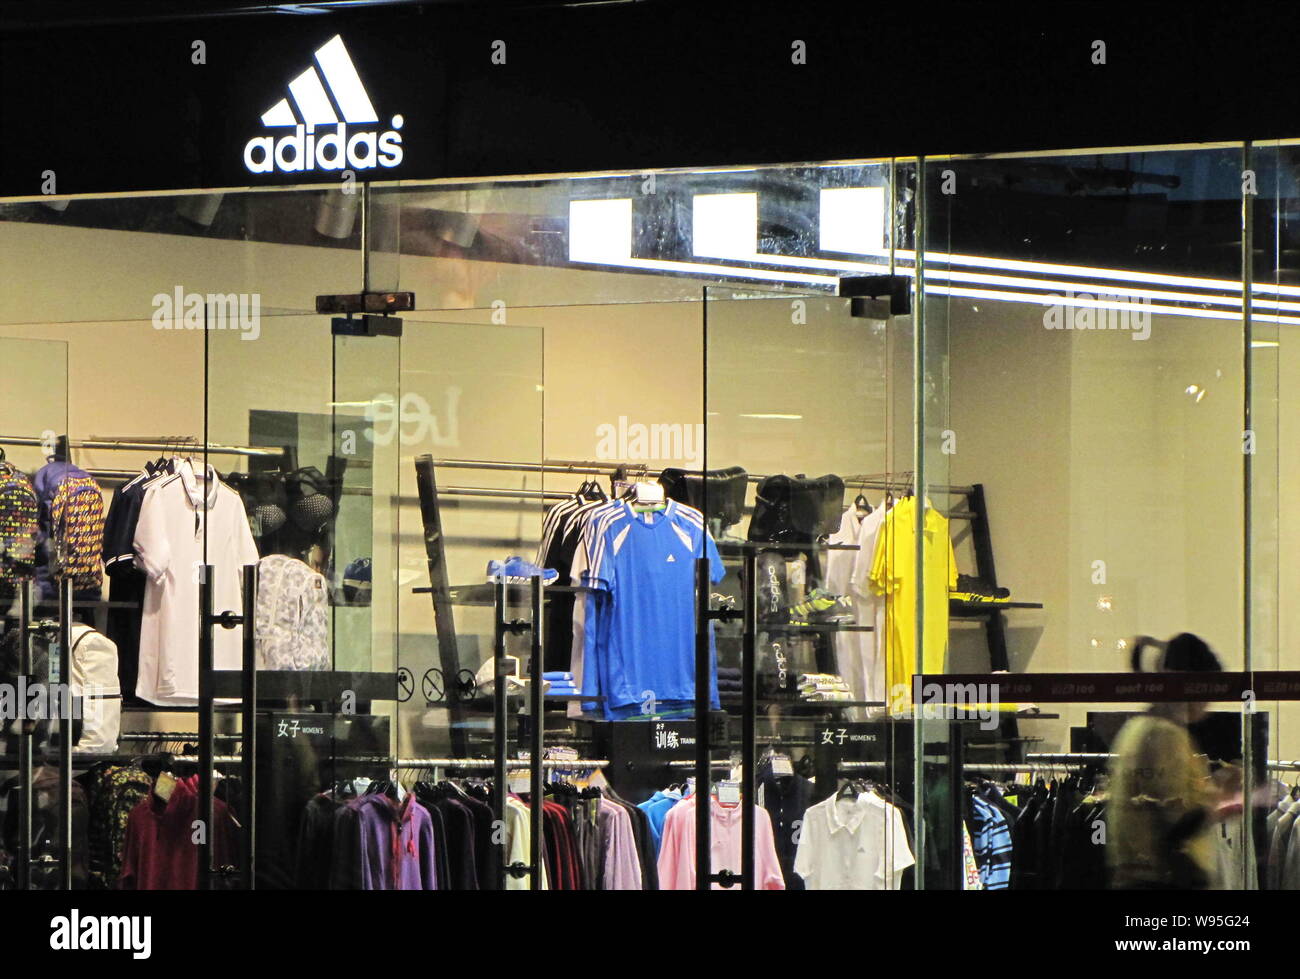 File--A customer shops in an Adidas store in Shanghai, China, 10 April  2011. Adidas AG will aim at niches such as high fashion and childrens wear  Stock Photo - Alamy